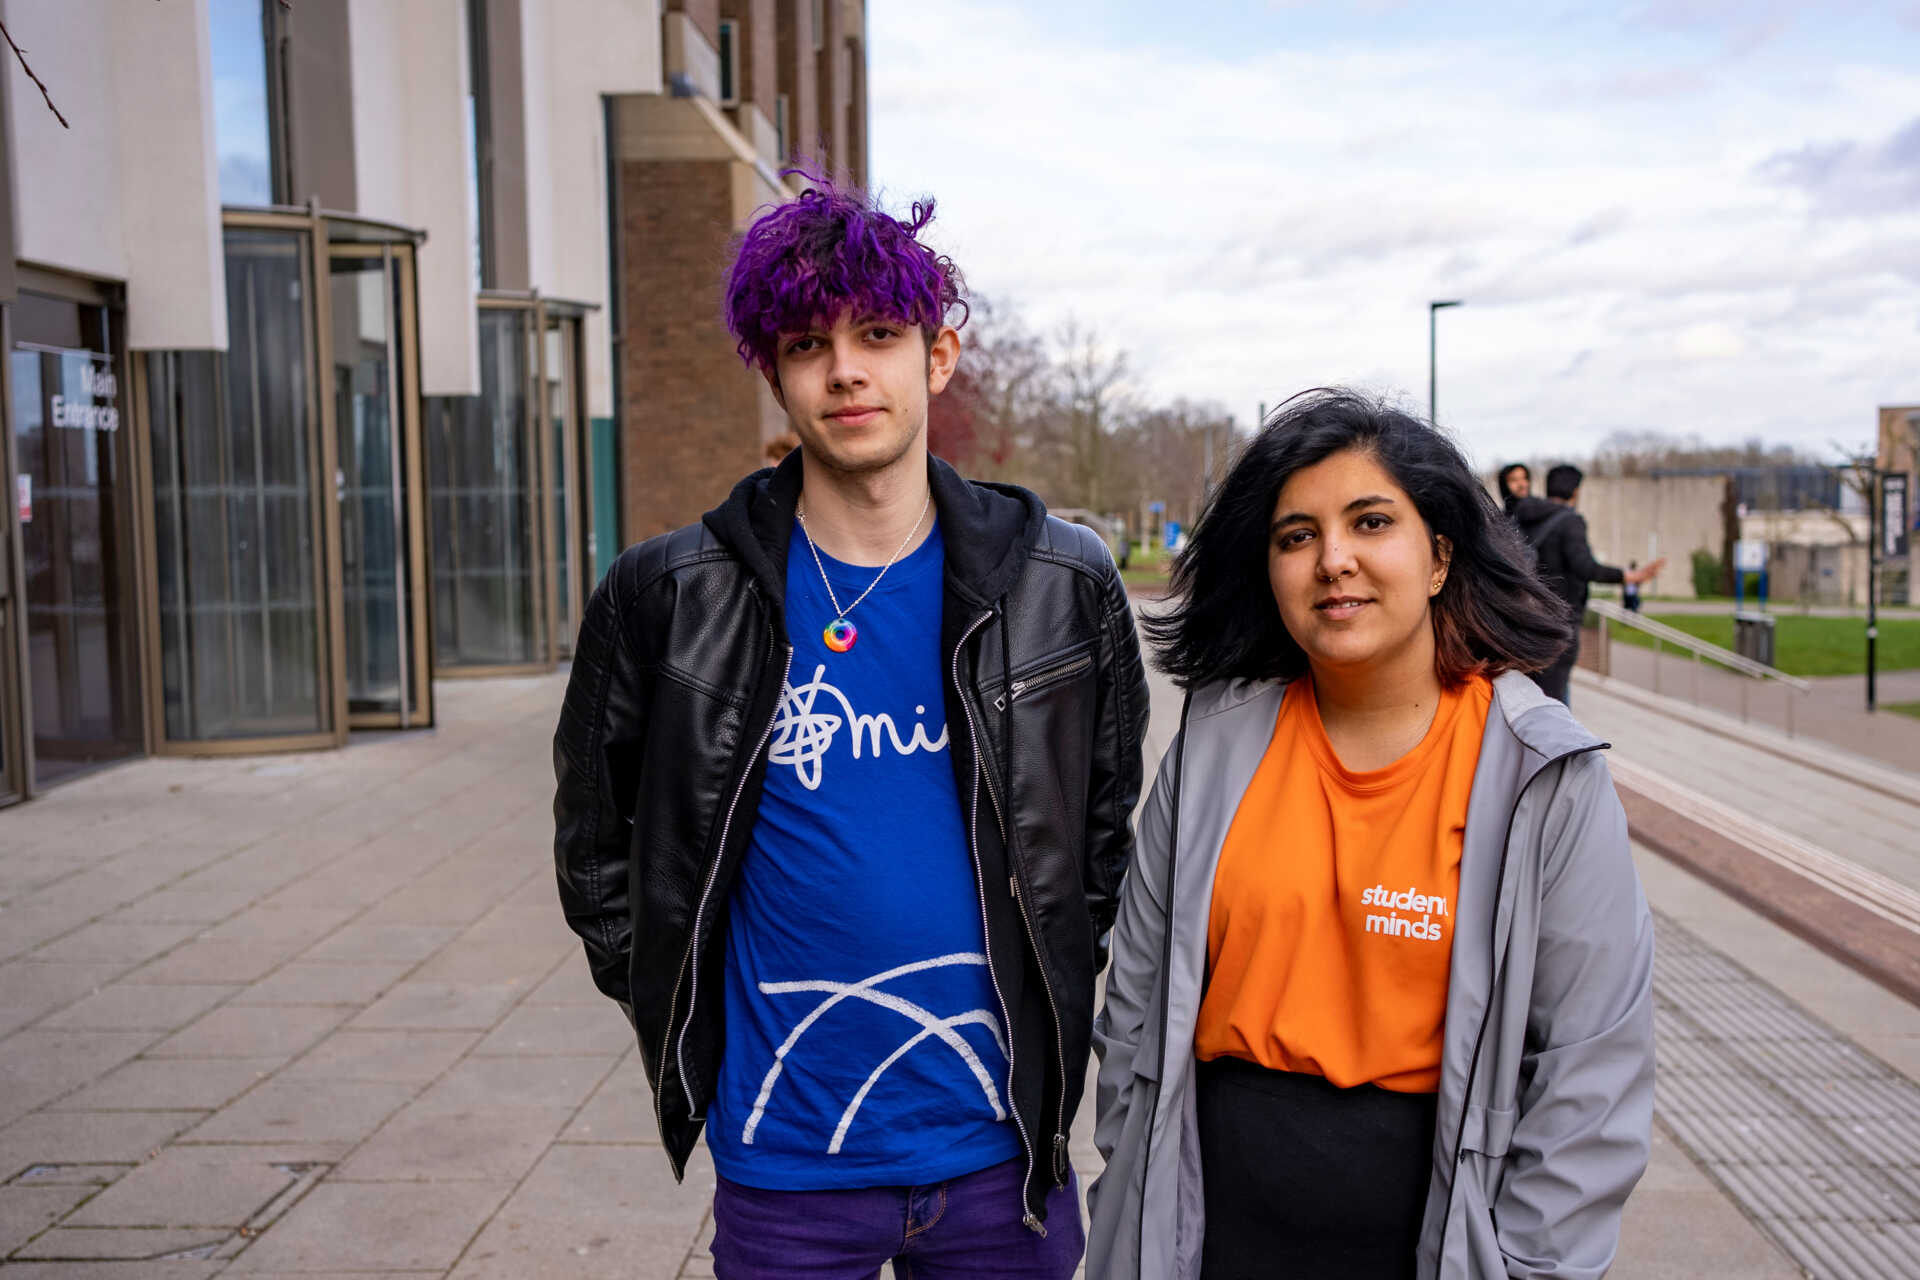 Tommy and Shivali from Kent Mind Society wearing Mind and Student Minds t-shirtss